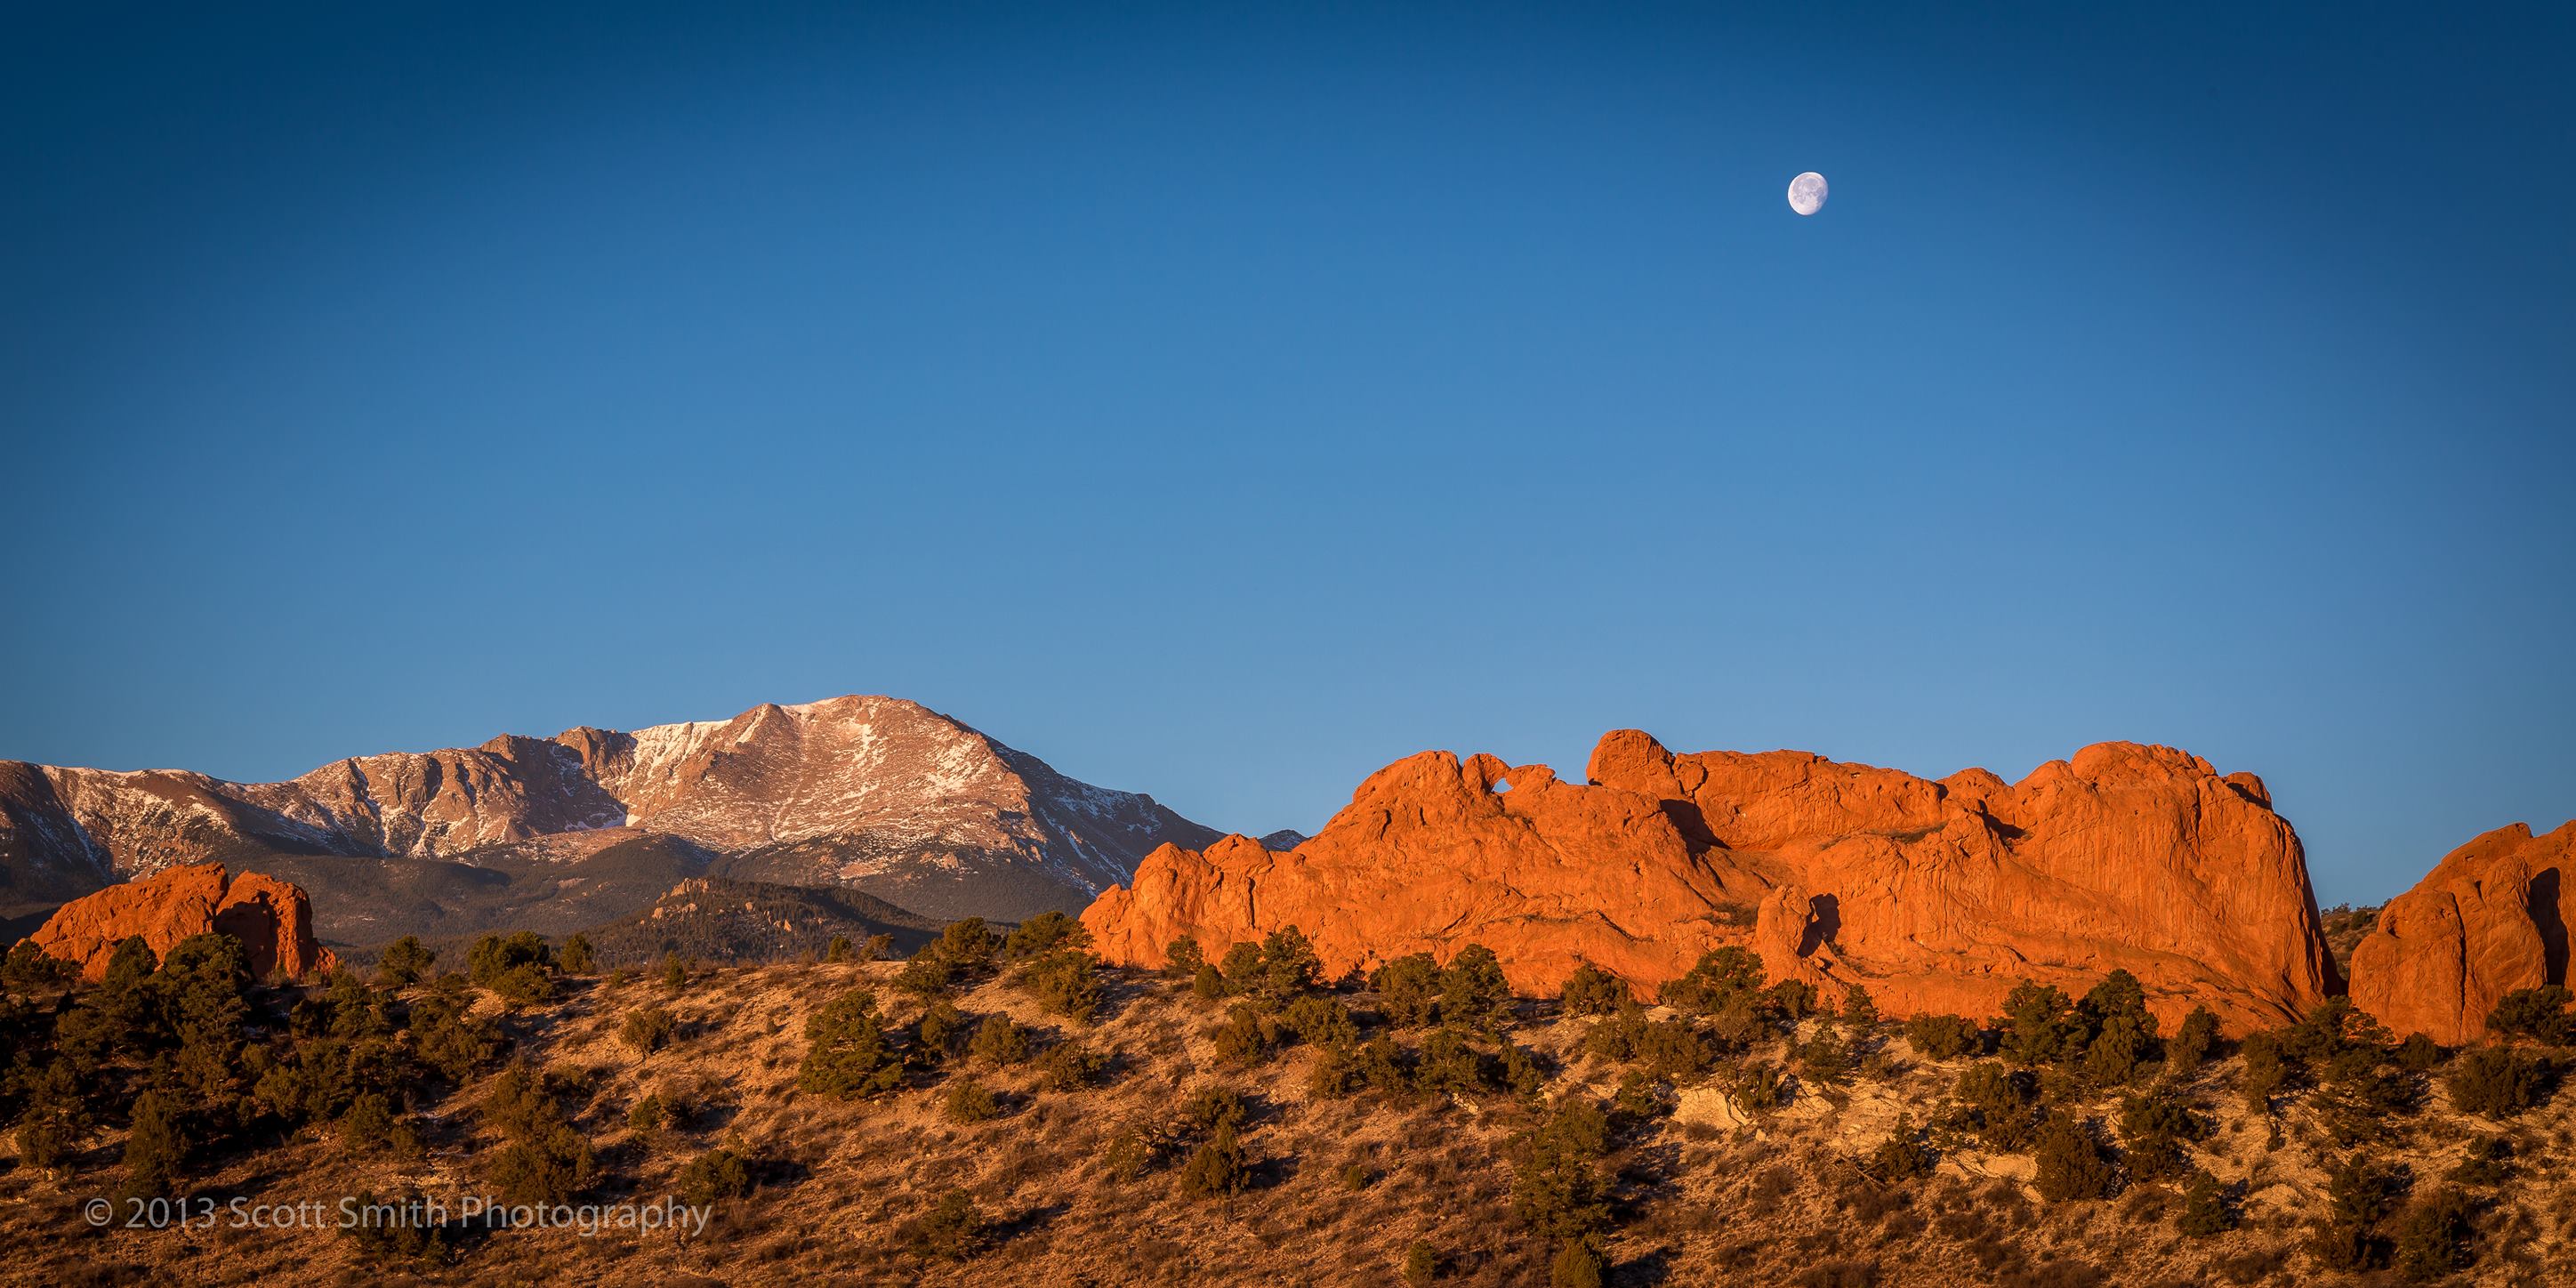 Sun Rising, Moon Setting - The moon sets as the morning sun lights up the Garden of the Gods and Pike's Peak in Manitou Springs, Colorado. by Scott Smith Photos